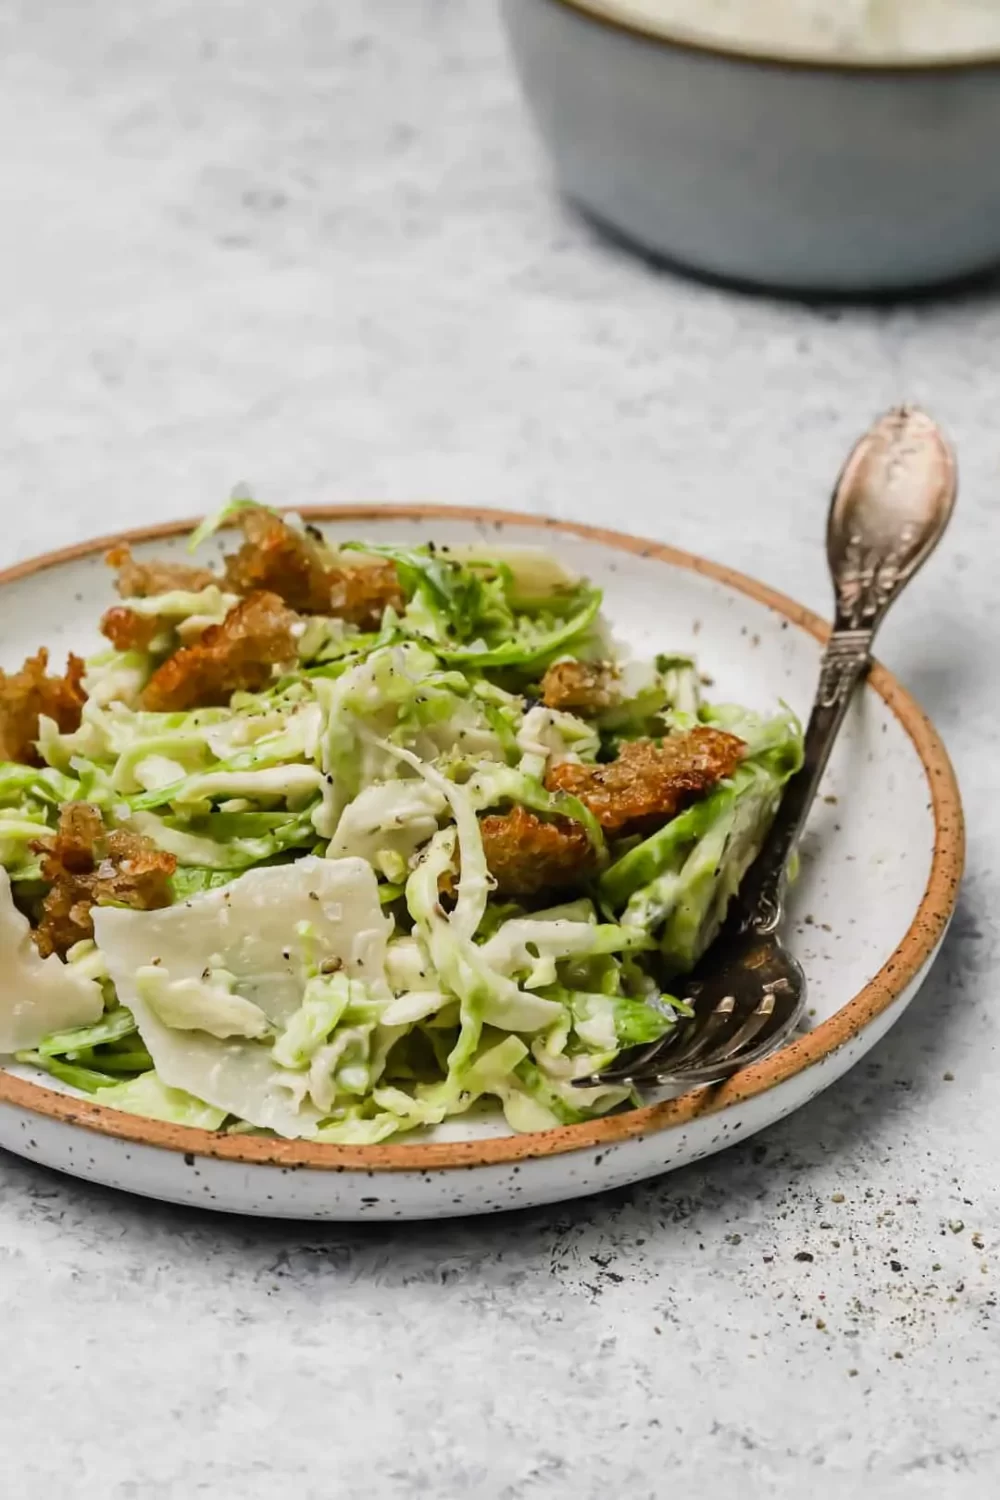 Shredded Brussel Sprouts Salad with Truffle Oil